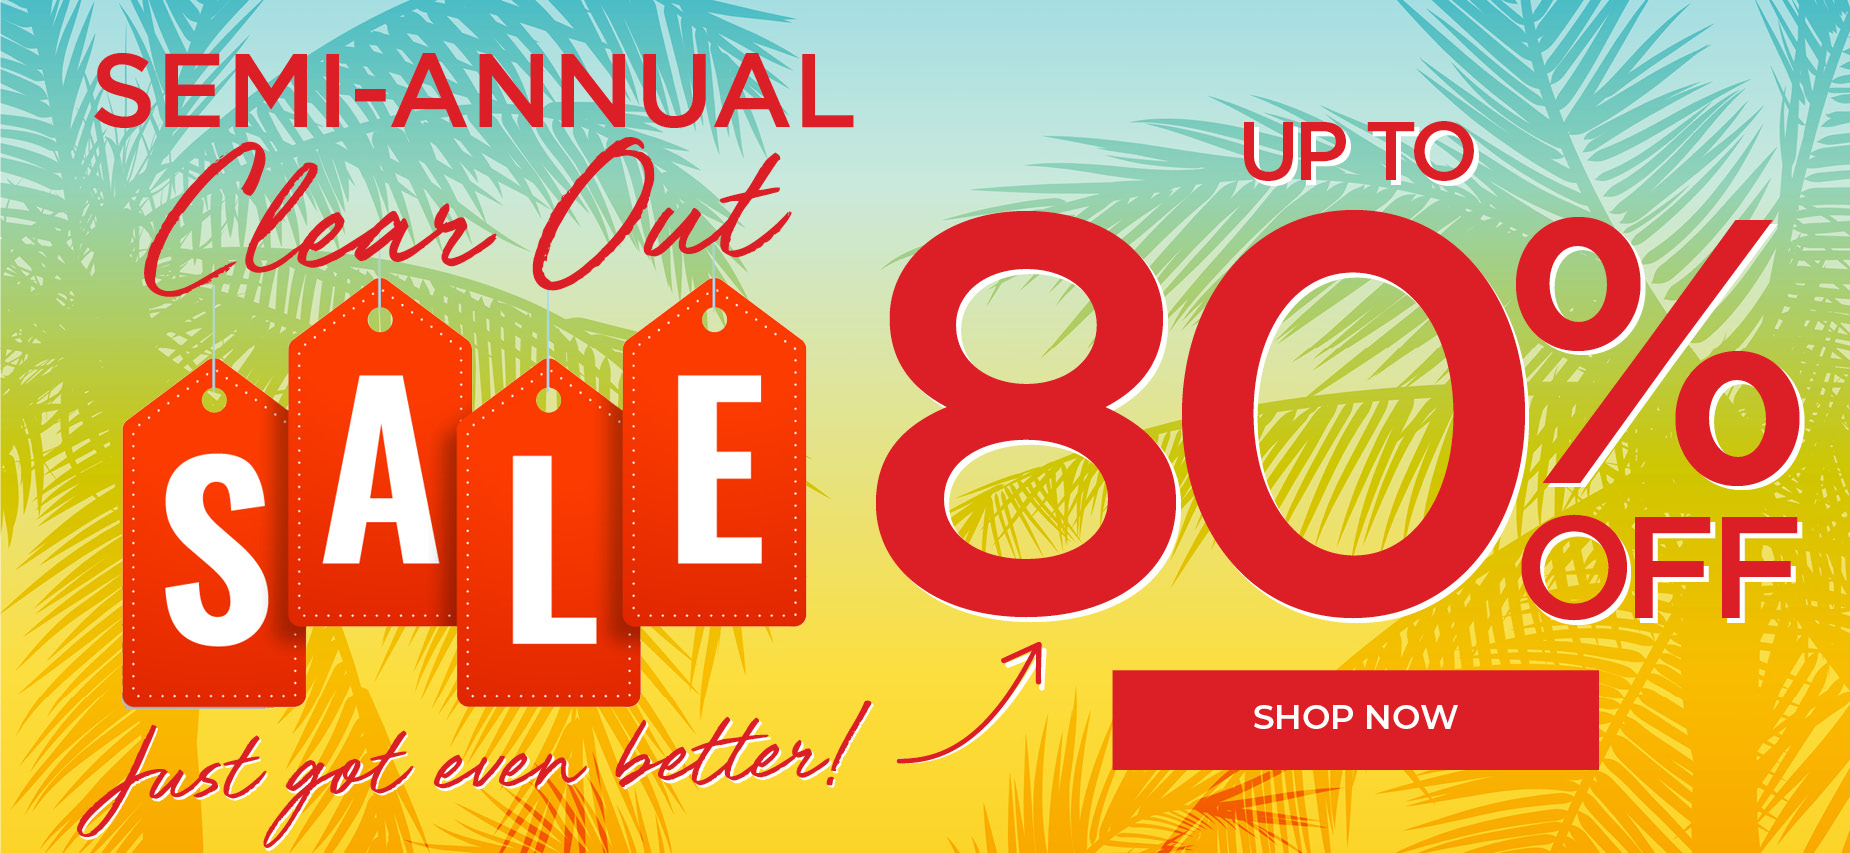 SEMI-ANNUAL CLEAR OUT SALE! WEEKEND UPGRADE! SHOP NOW FOR UP TO 80% OFF